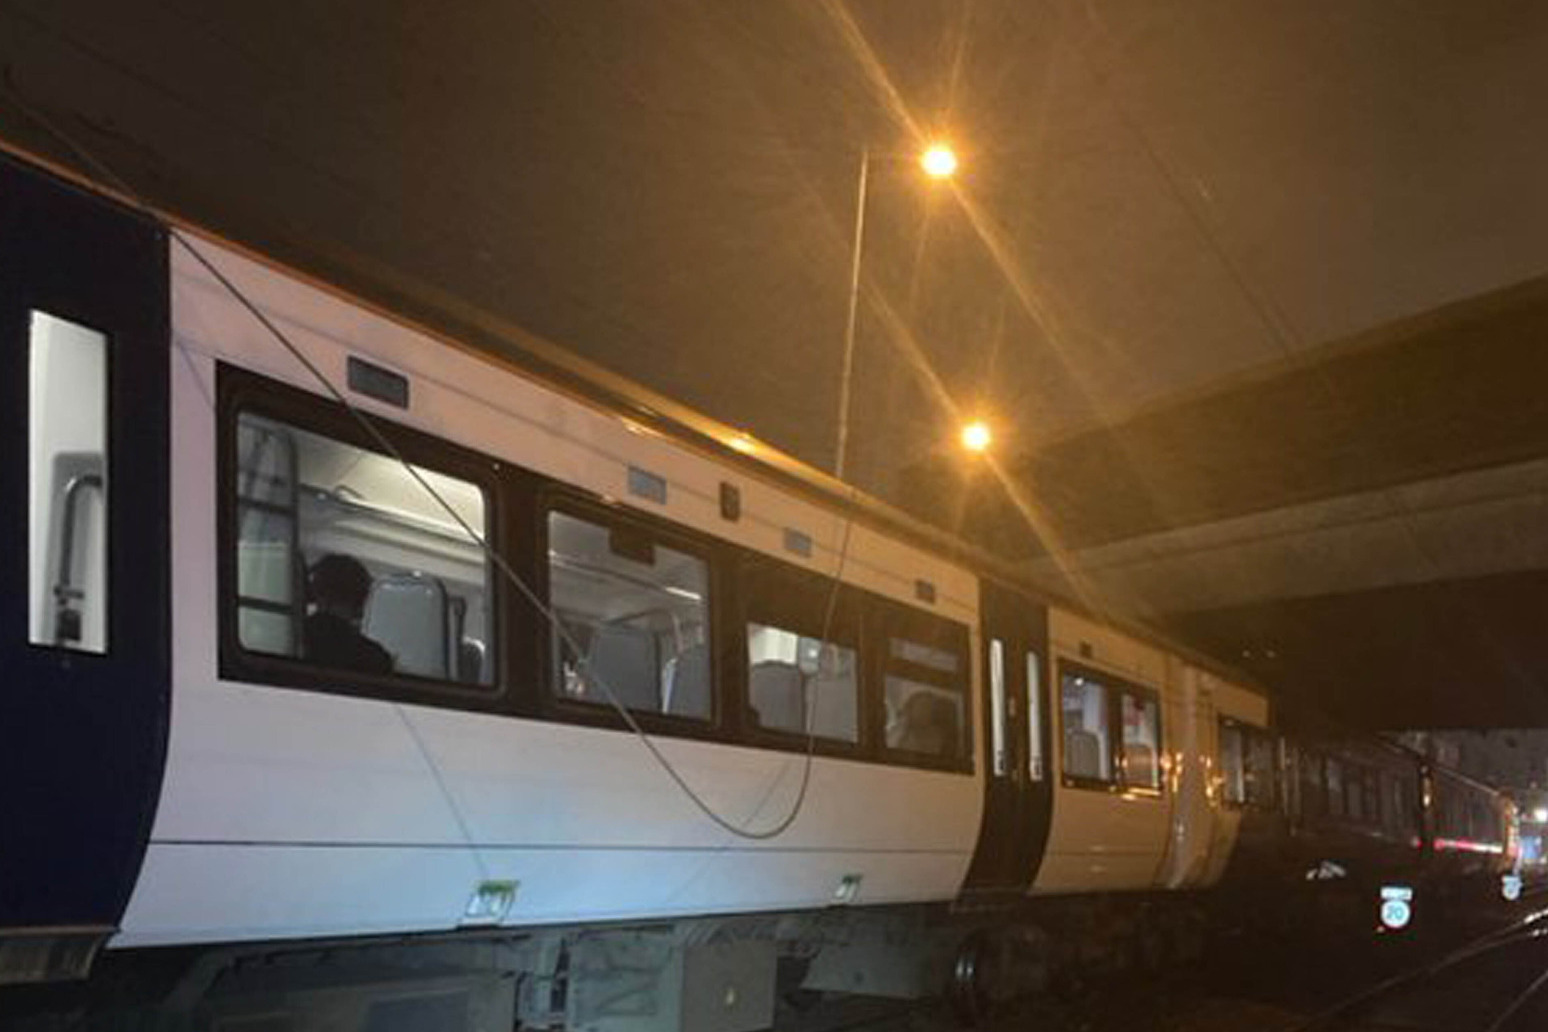 Train passengers stranded for hours due to damaged electric wires 